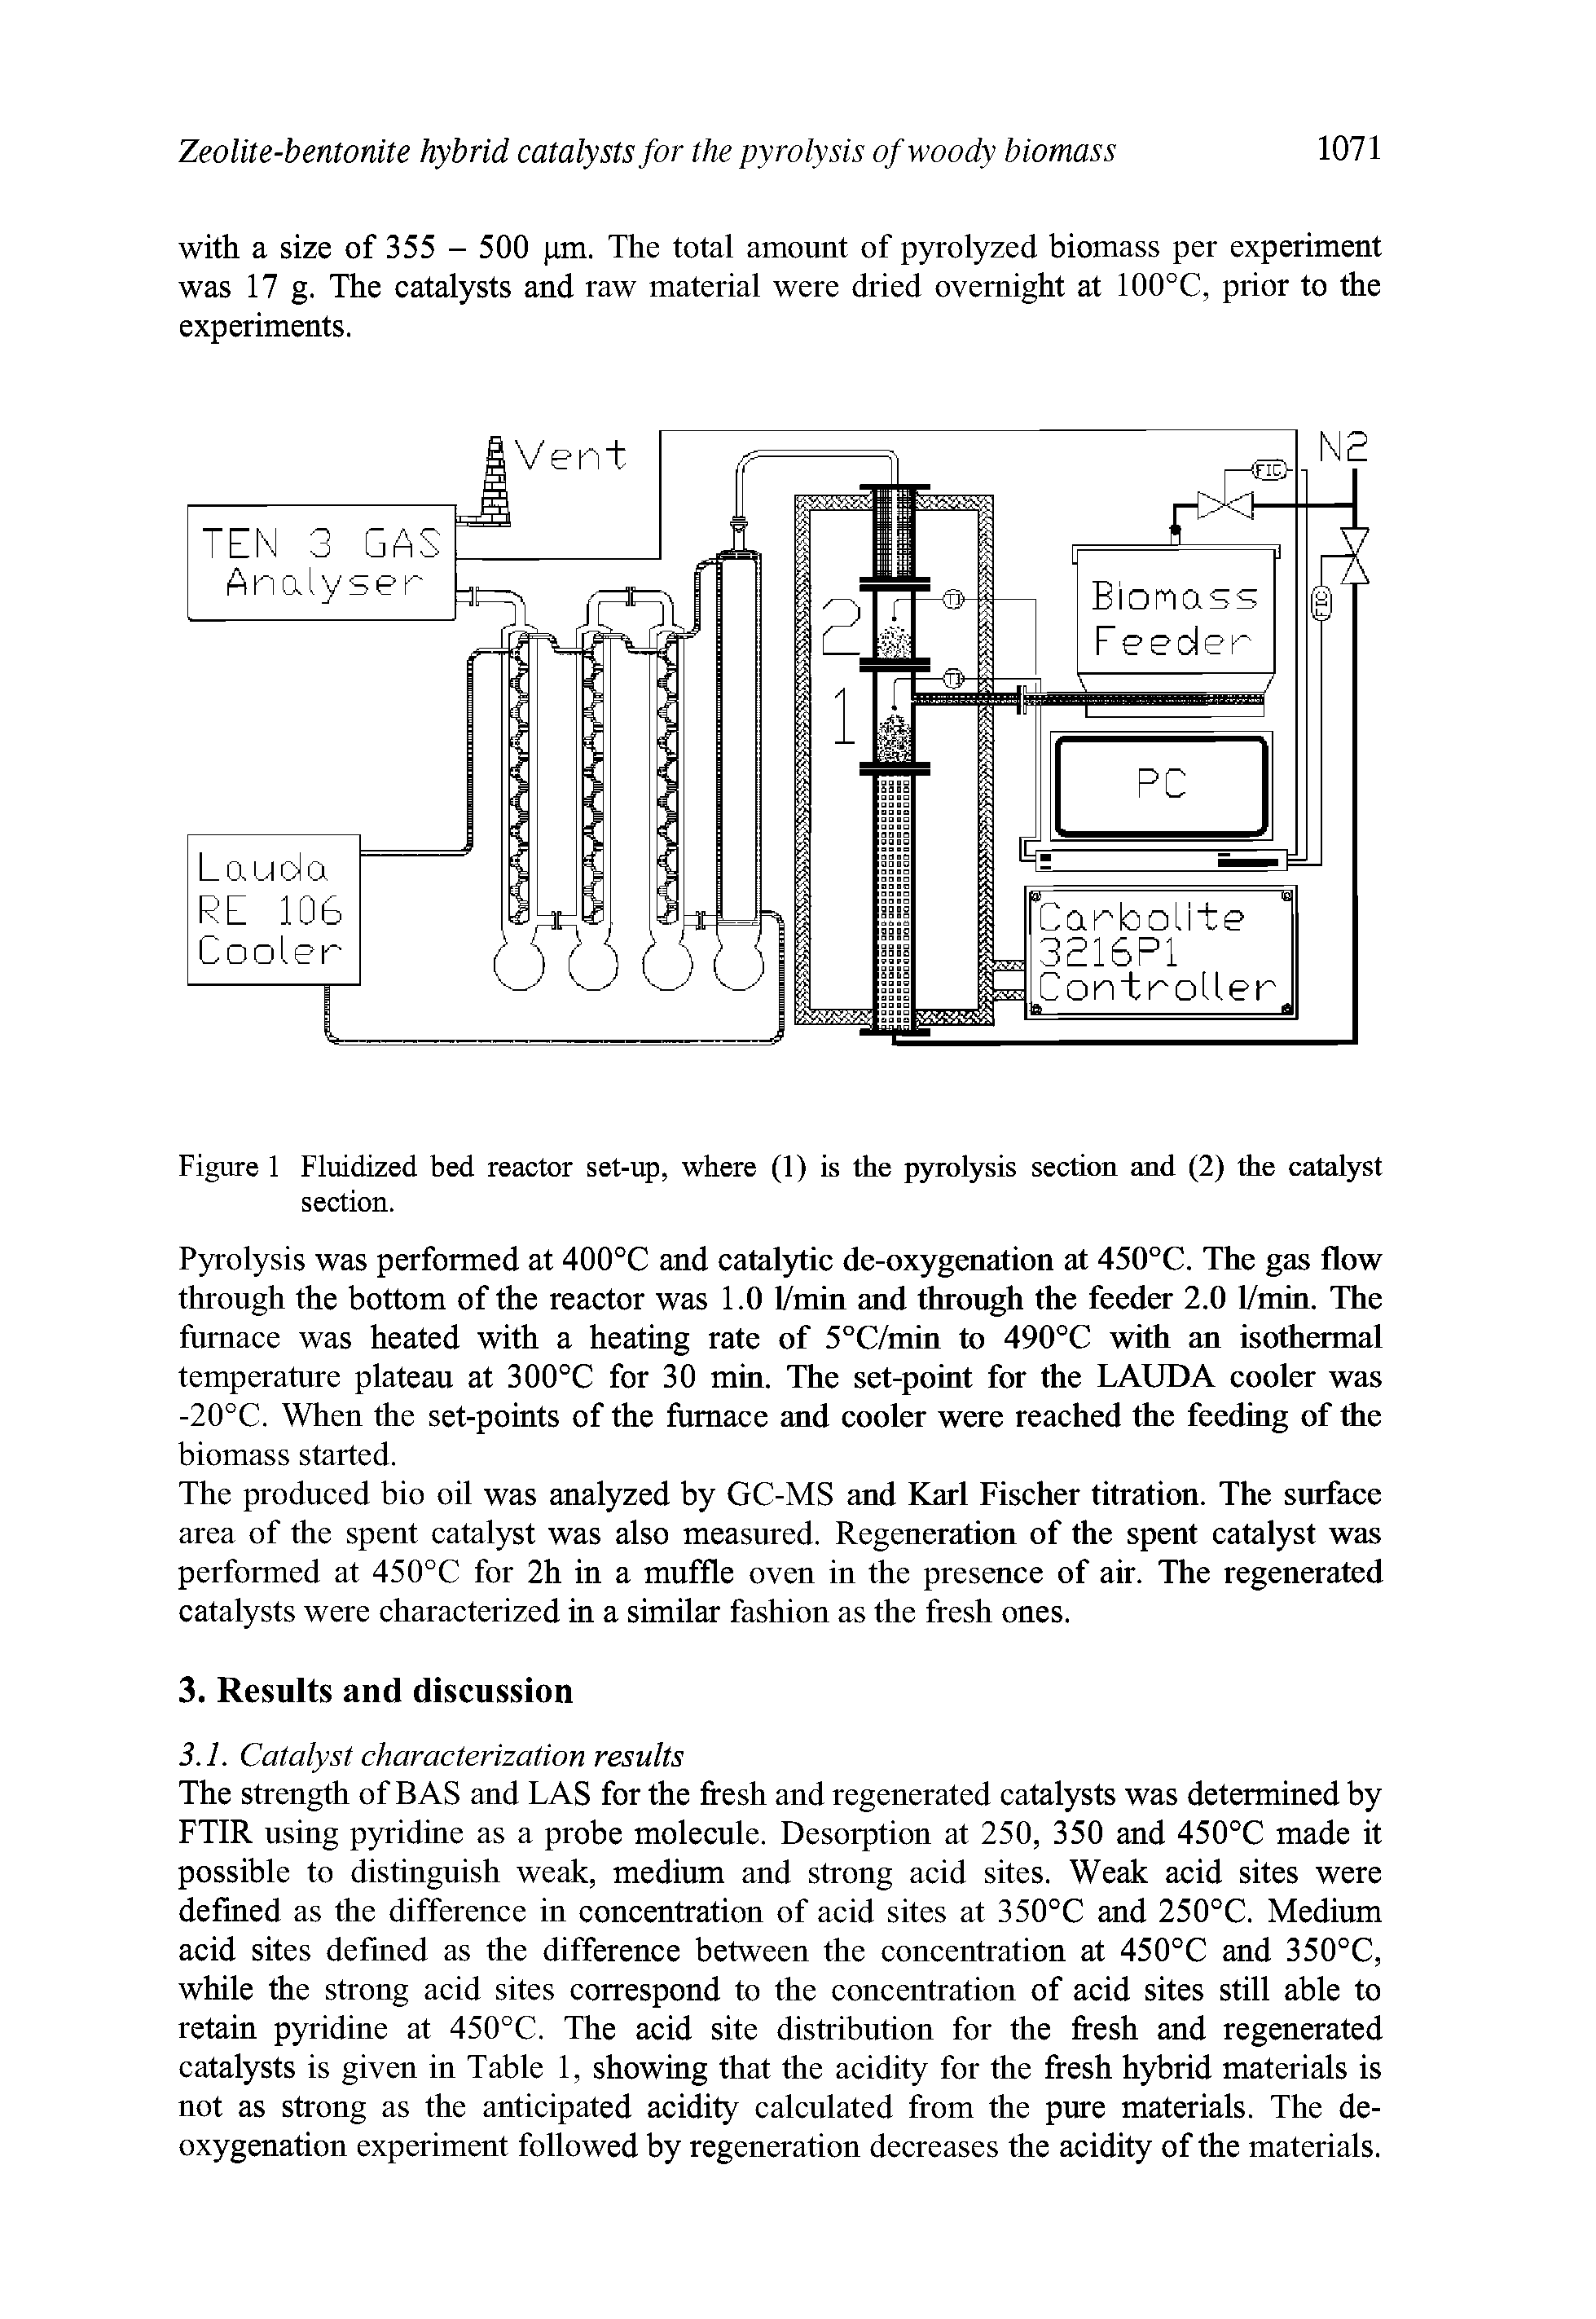 Figure 1 Fluidized bed reactor set-up, where (1) is the pyrolysis section and (2) the catalyst section.